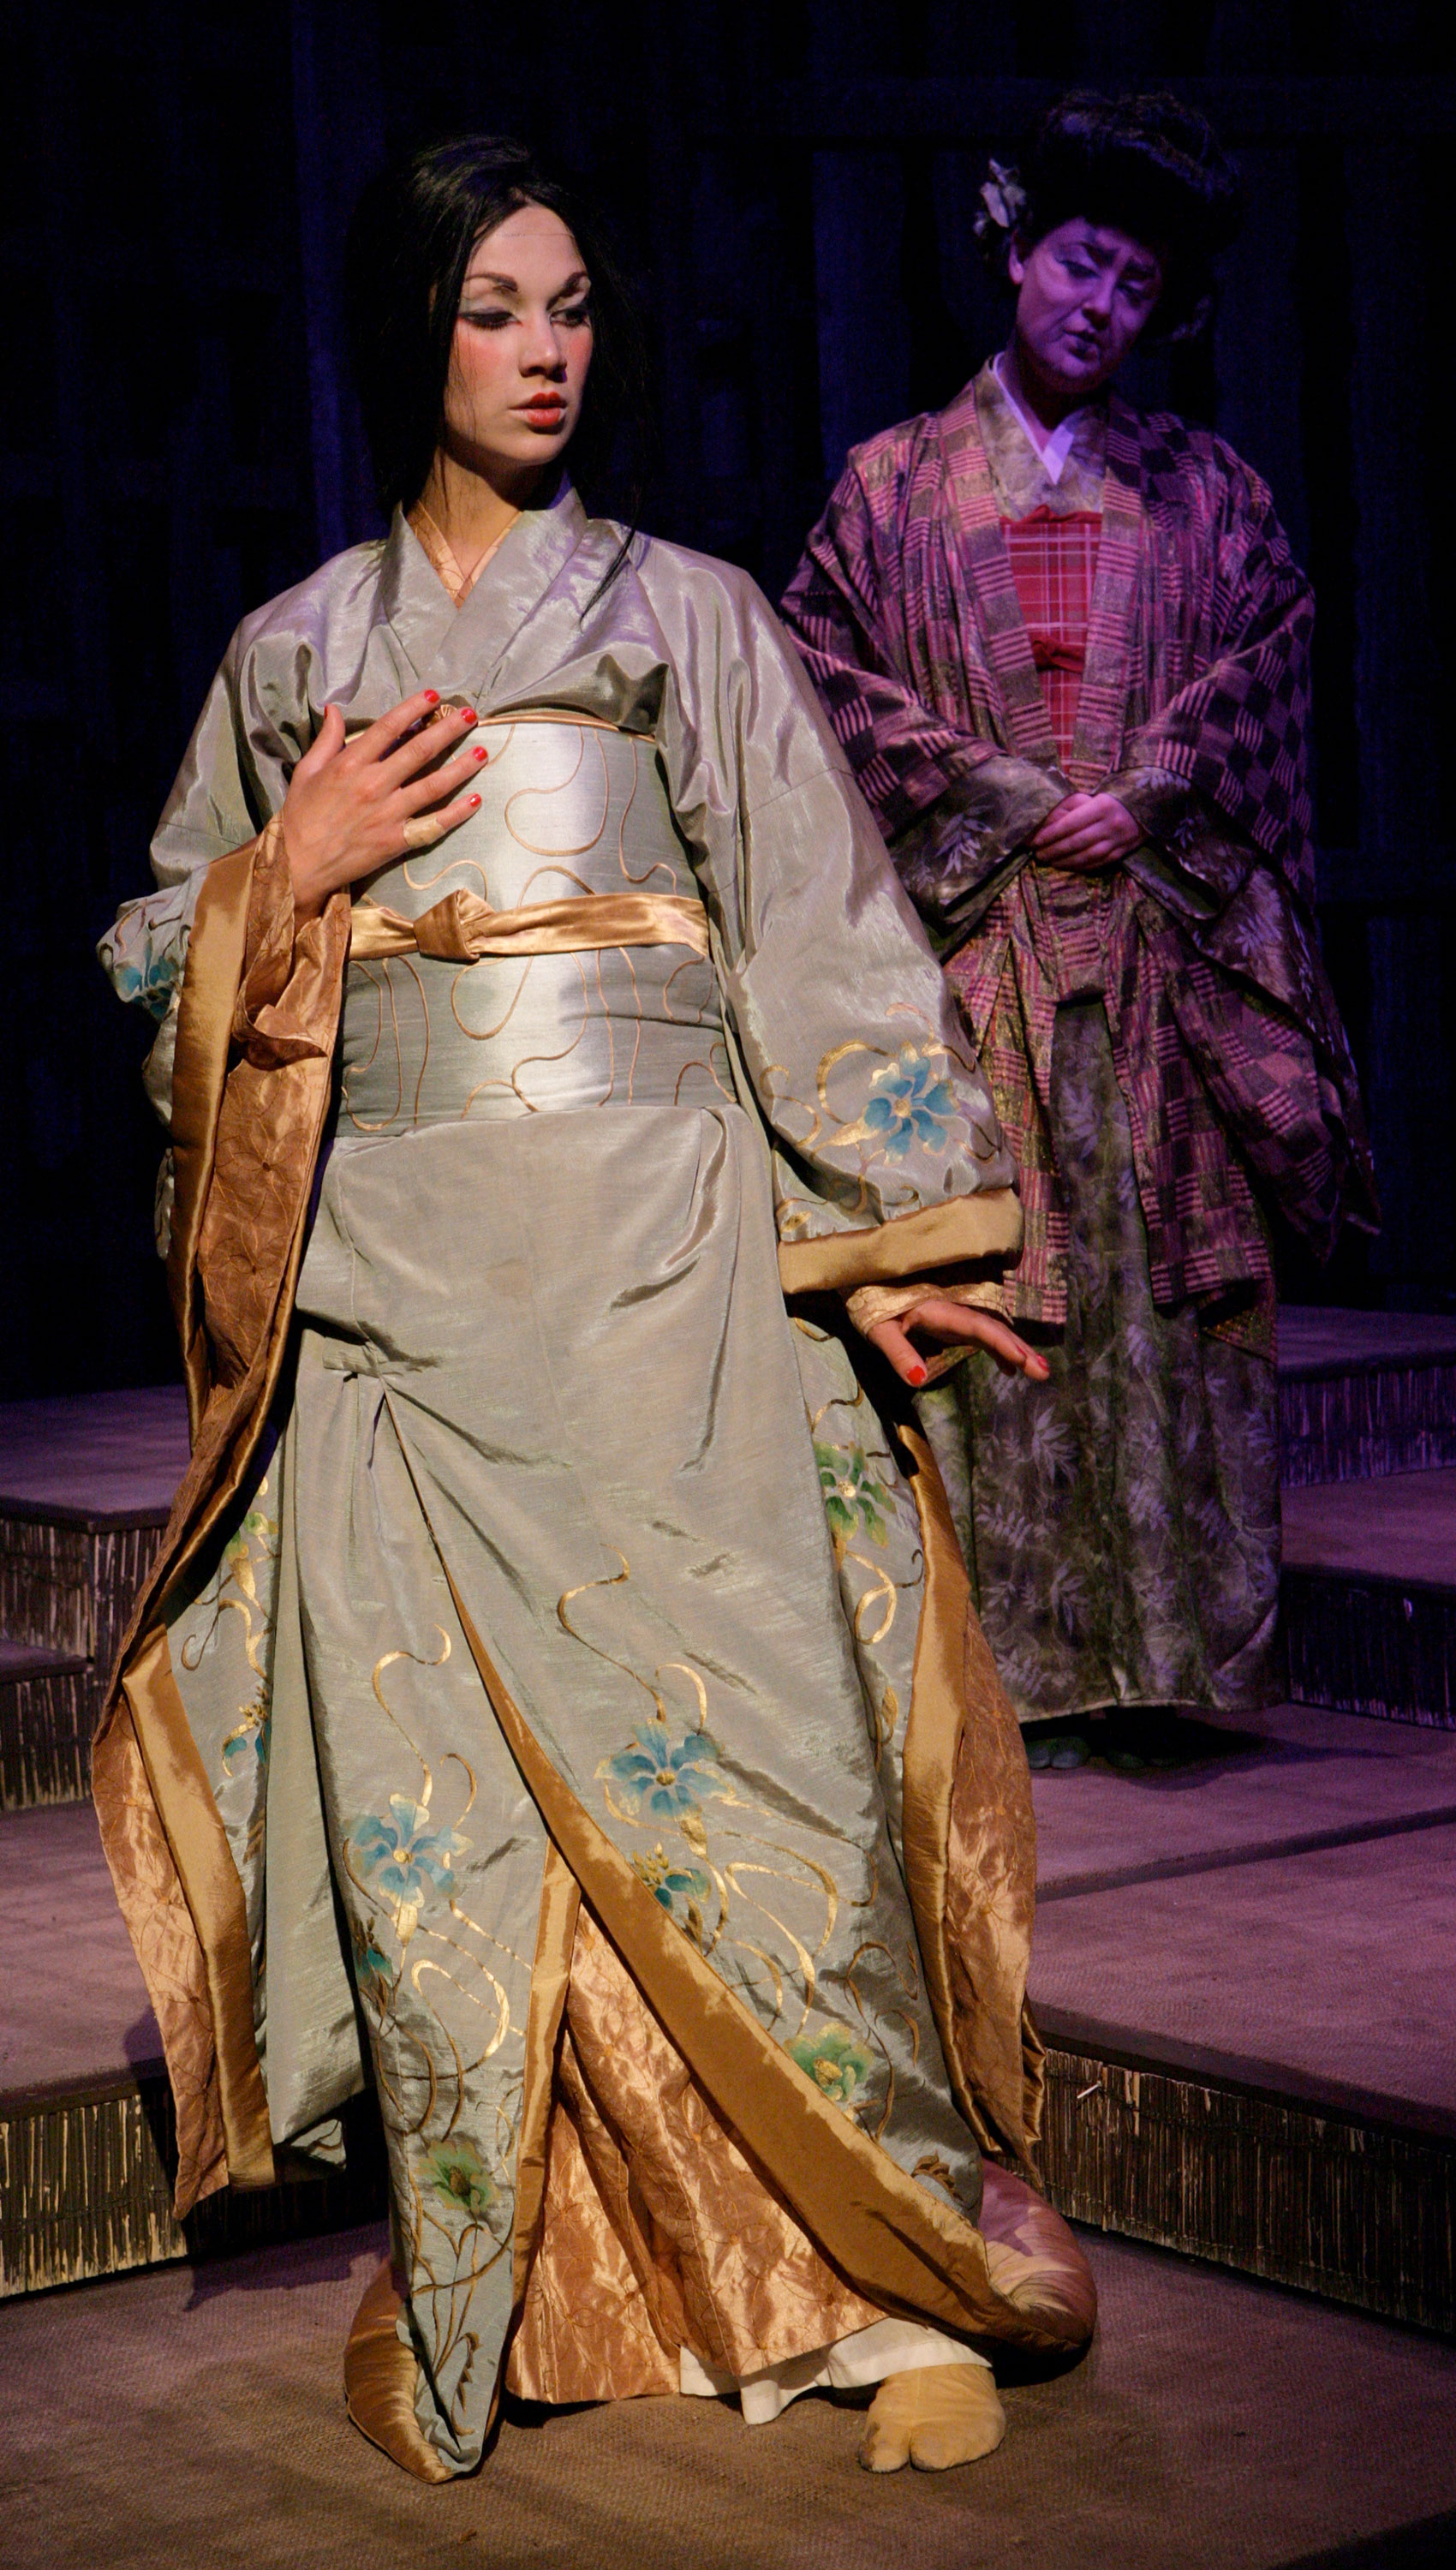 A woman in formal, floral attire accented in gold and makeup is spotlighted on stage. She is looking downward diagonal of stage left and has her right hand on her chest and her left hand at her side with the palm parallel to the floor. An older woman in multi-patterned attire watches the woman behind her from out of the spotlight. 